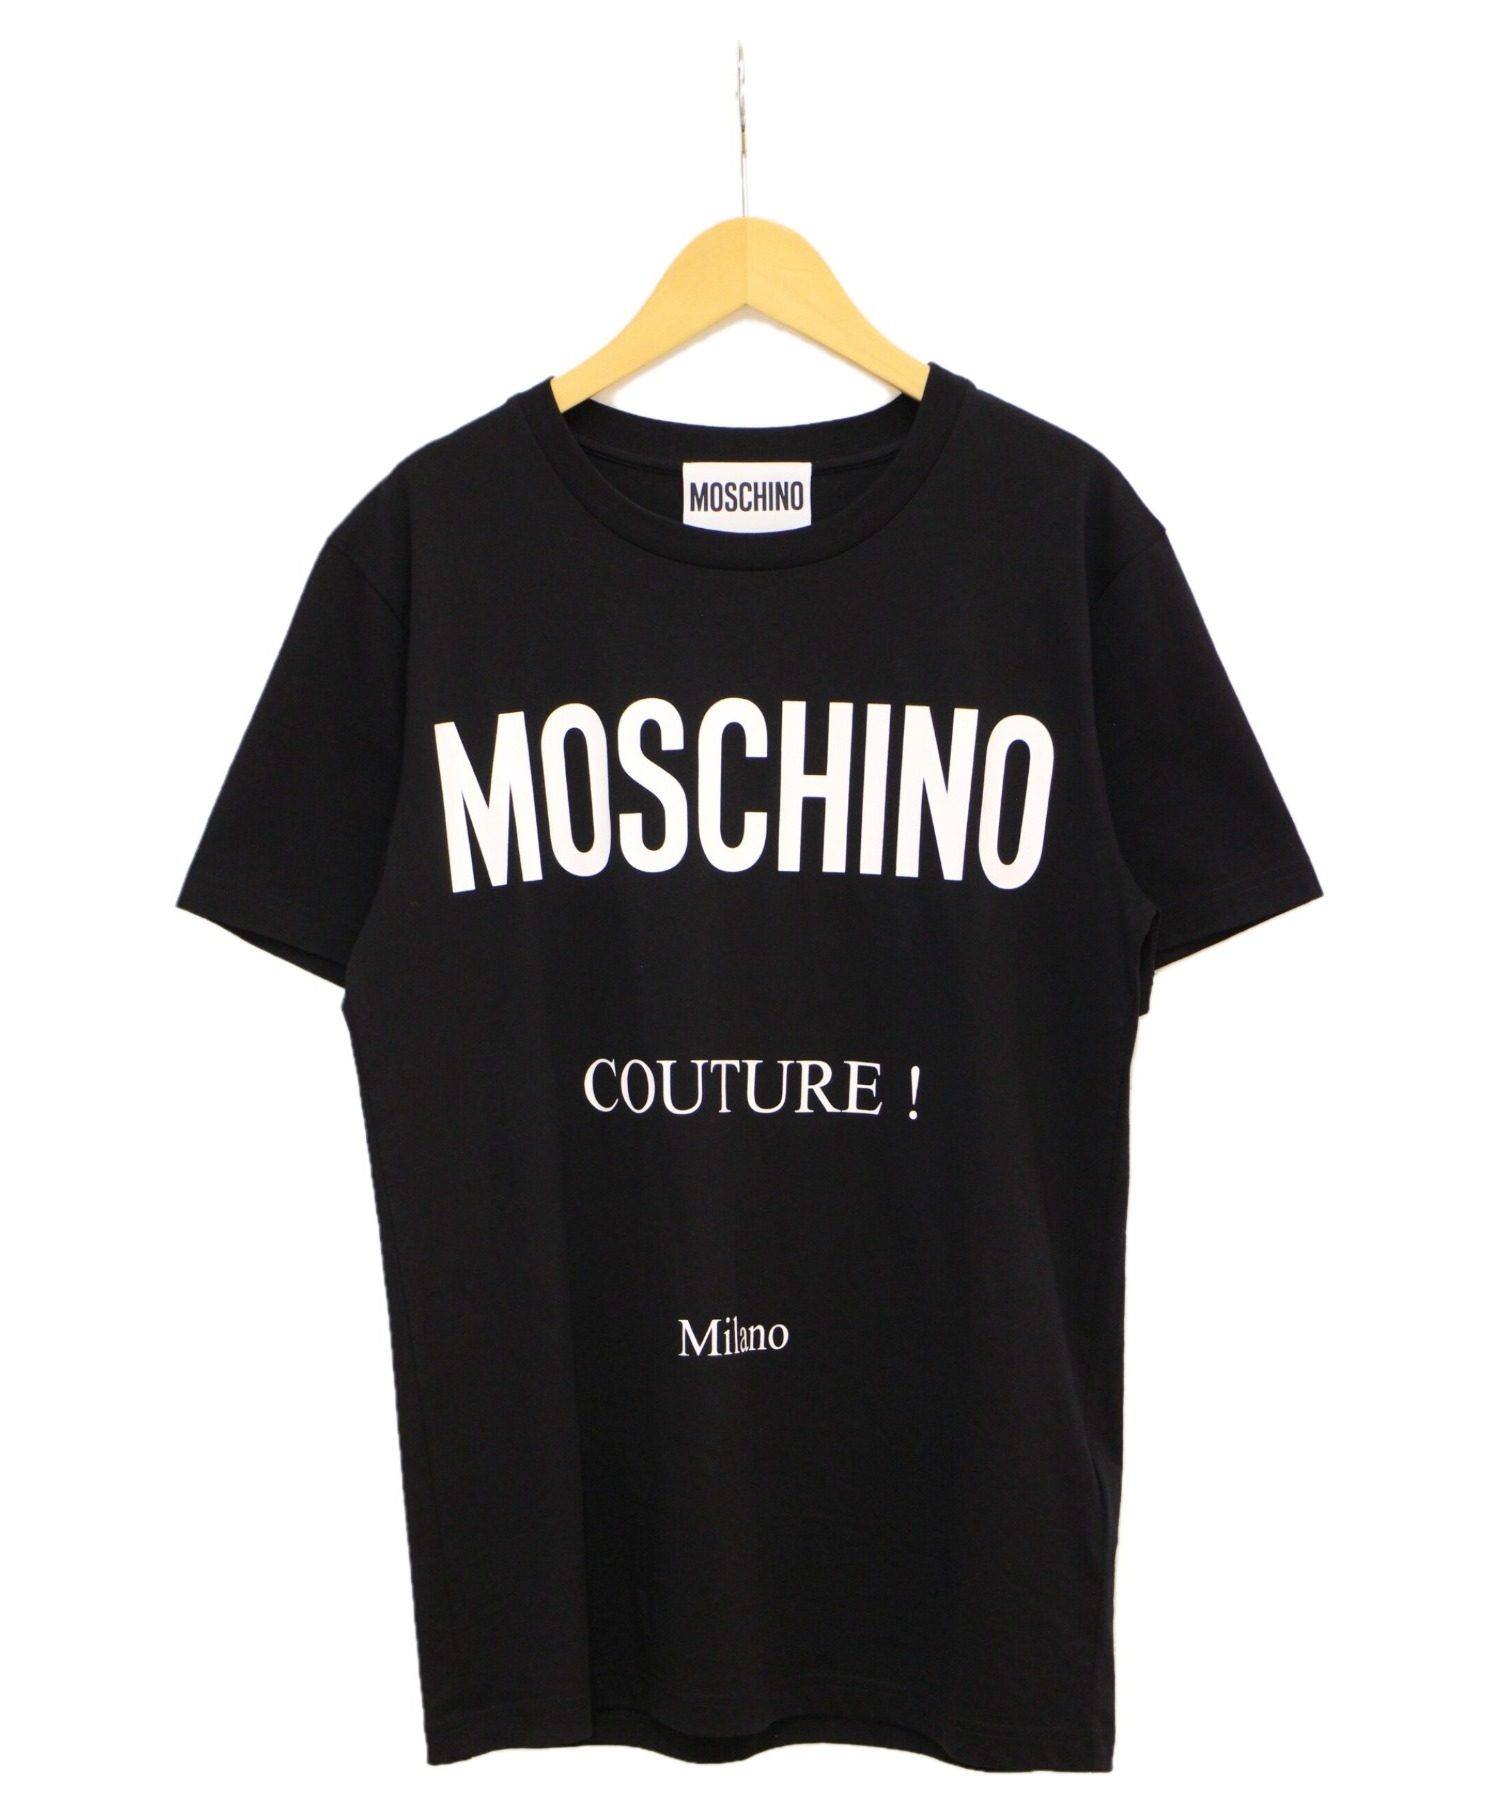 □46/ MOSCHINO COUTURE! モスキーノ ロゴ Tシャツ - Tシャツ